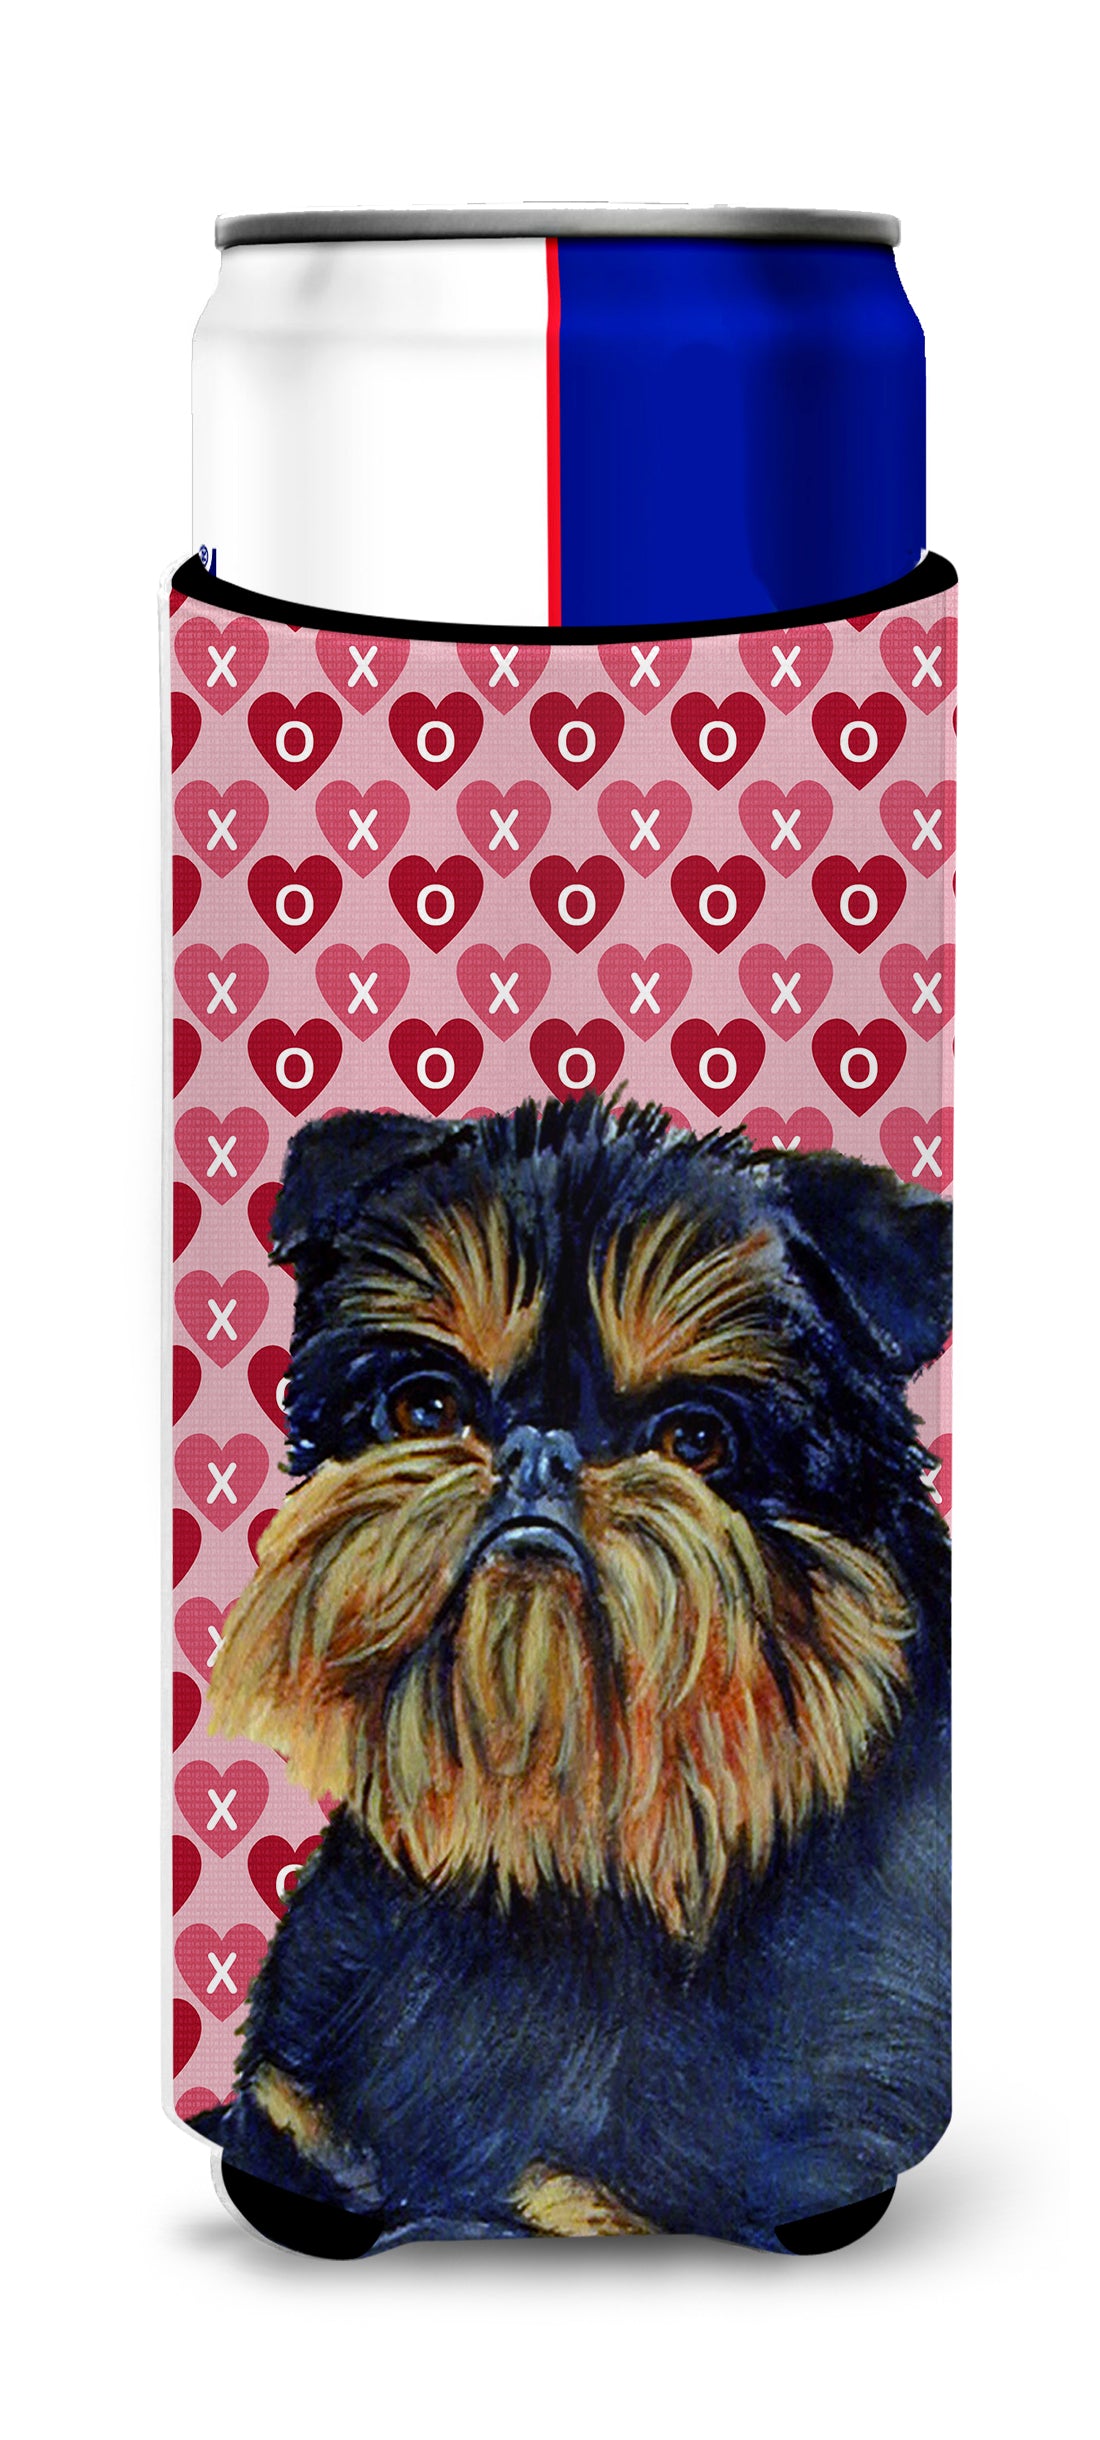 Brussels Griffon Hearts Love and Valentine's Day Portrait Ultra Beverage Insulators for slim cans LH9163MUK